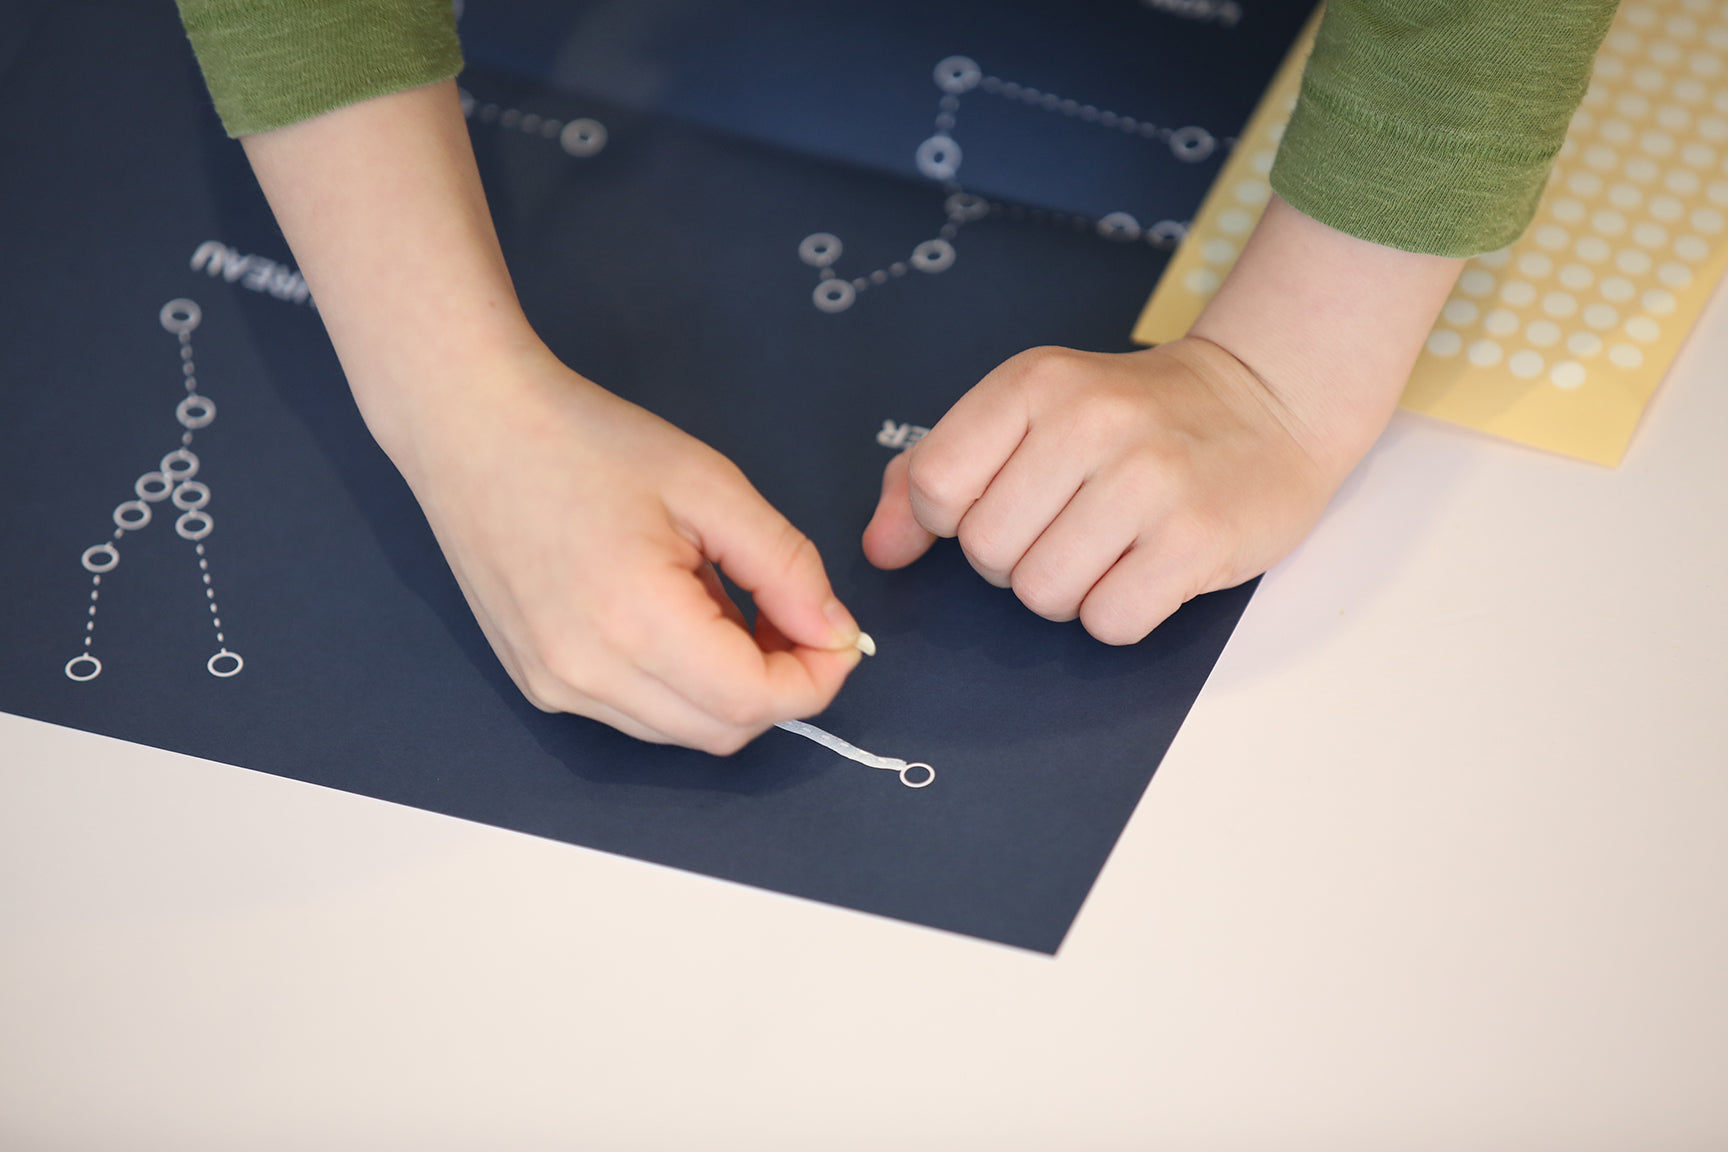 Draw the Constellations on a Poster Kit